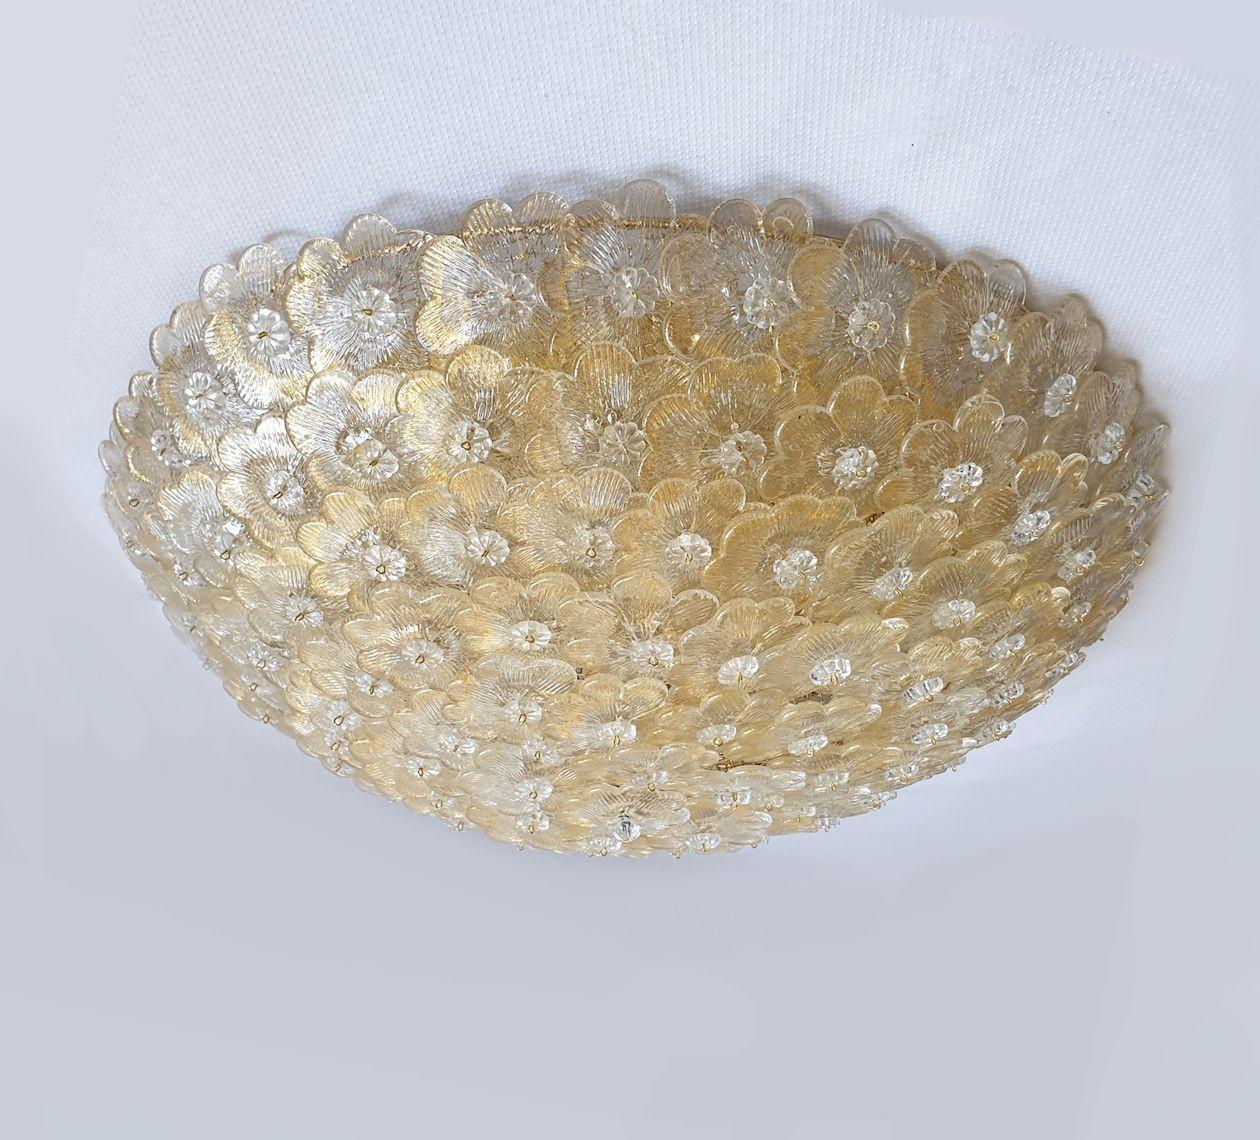 Large mid century modern flush mount chandelier, by Barovier, Italy 1970s.
Two flush-mounts available: sold and priced individually.
The chandelier is made of gold and clear Murano glass flowers, over a round gold painted metal grid frame.
Each